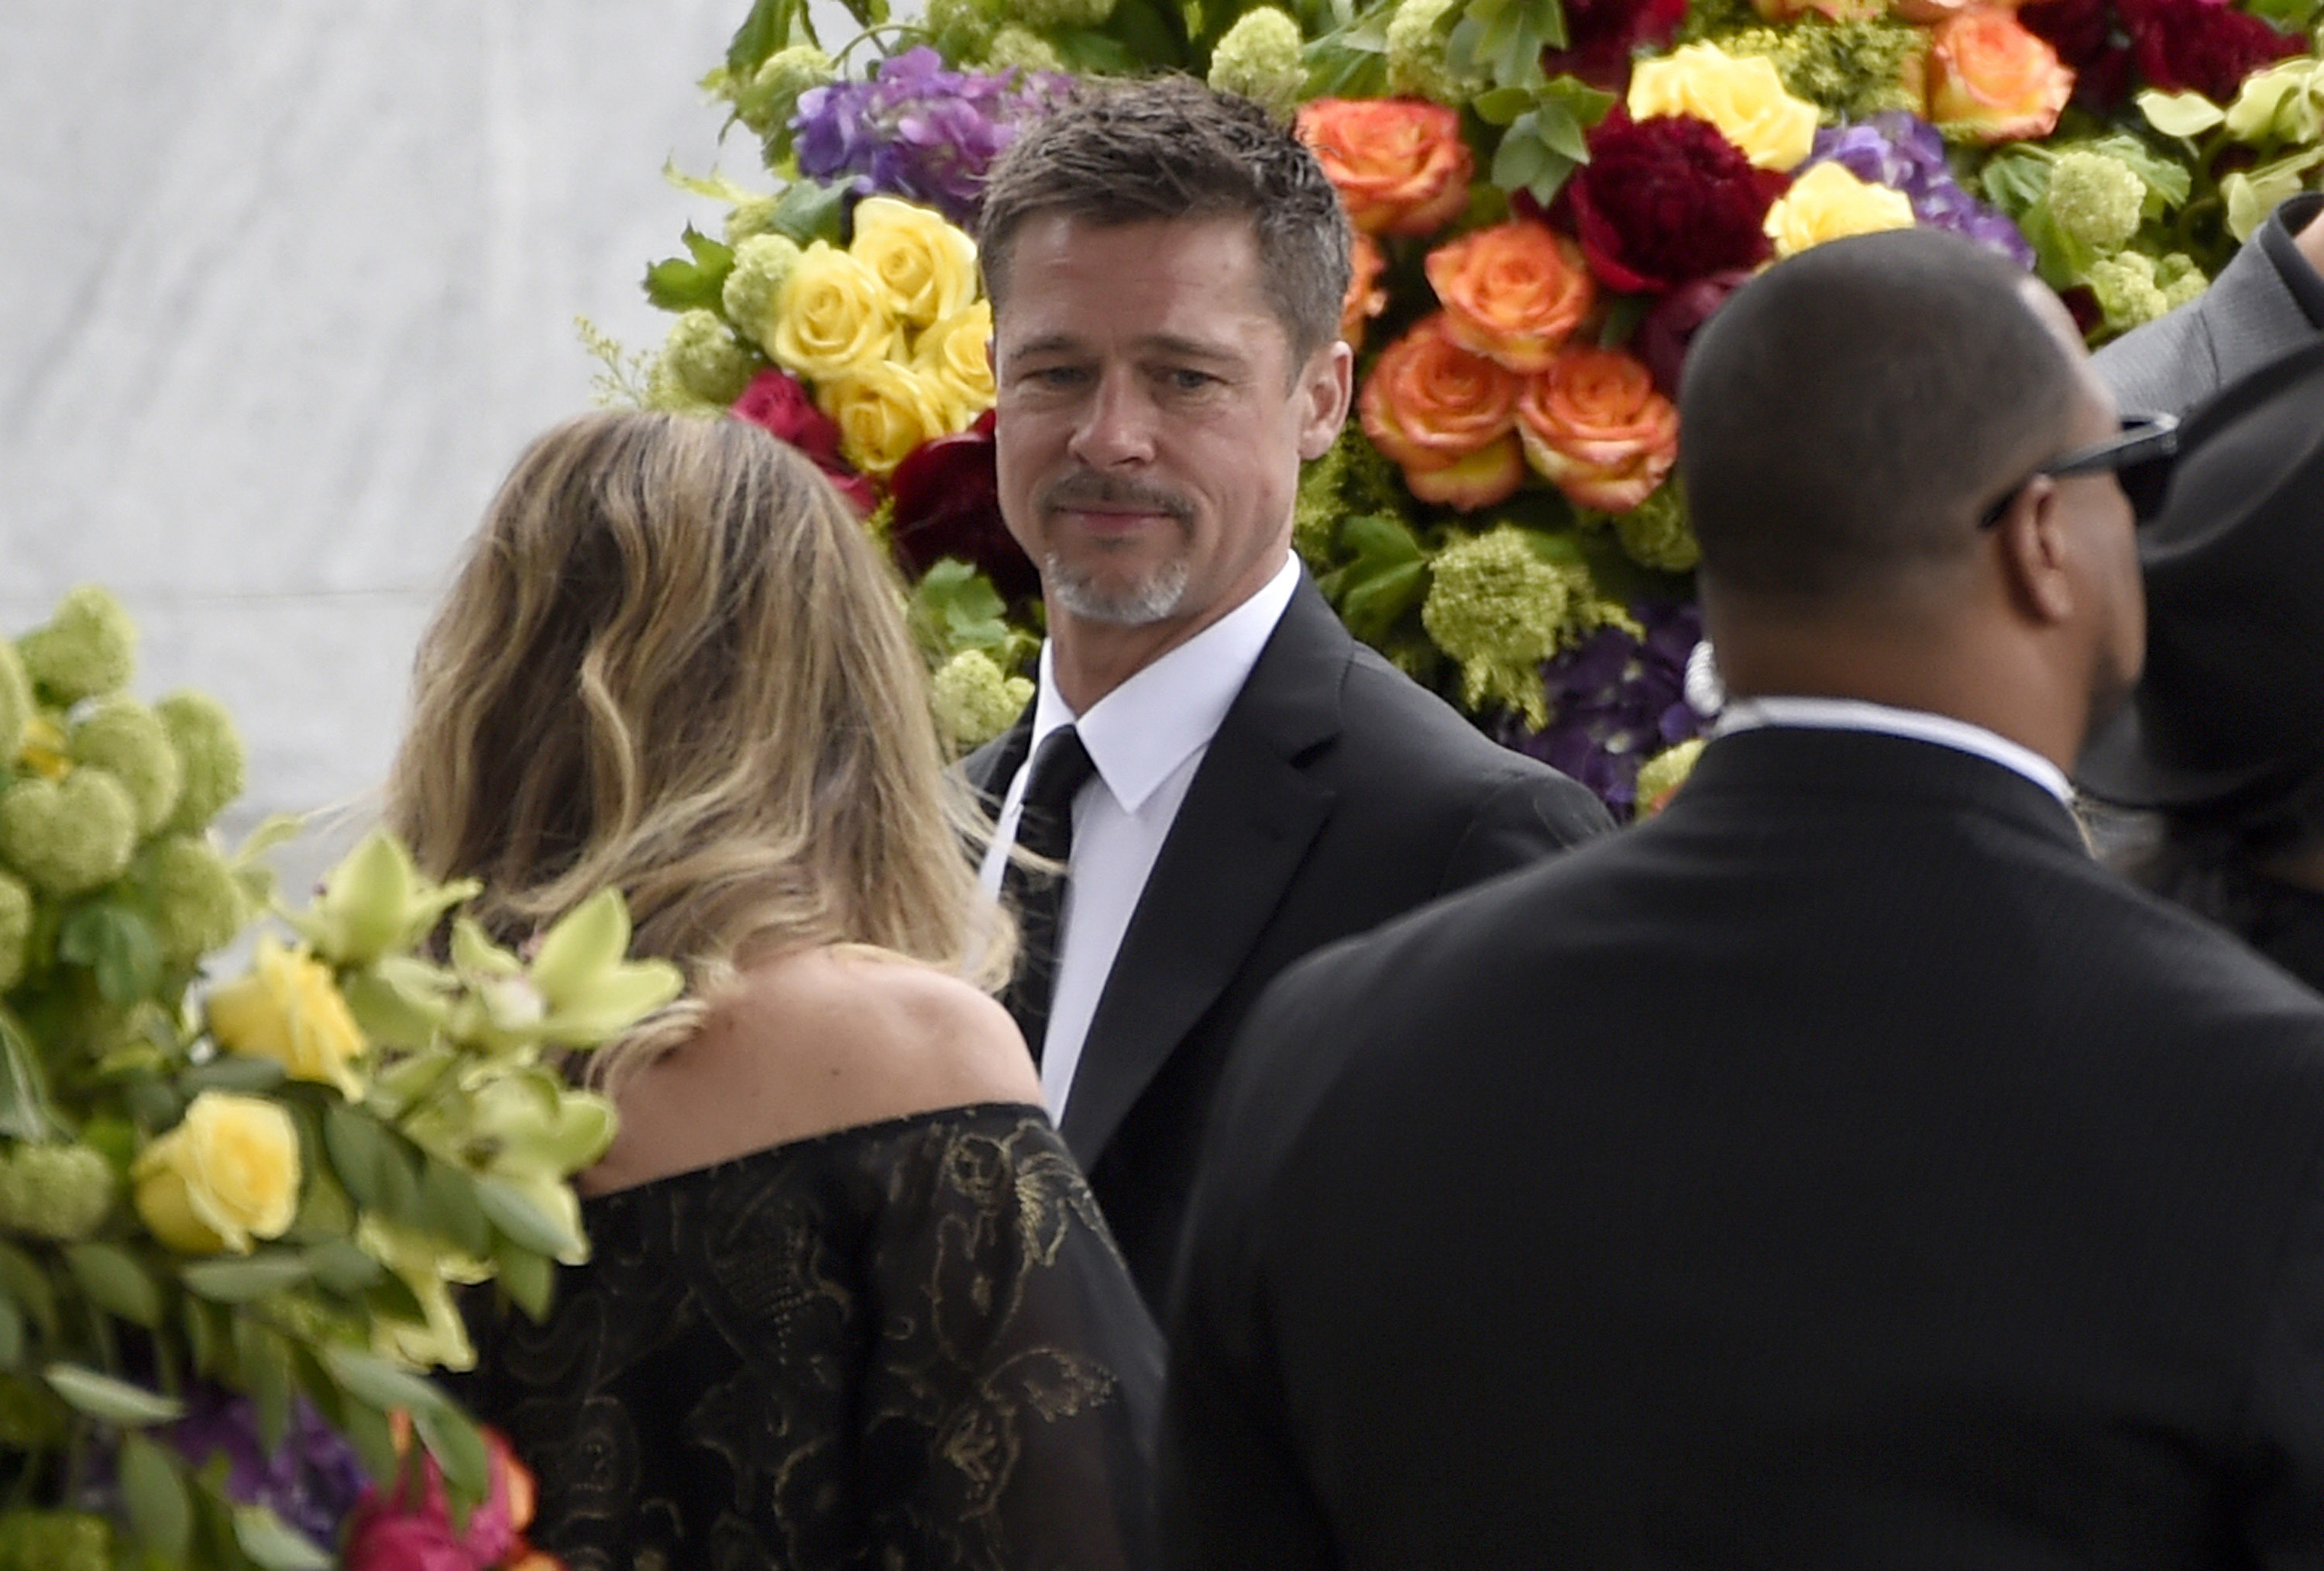 Brad Pitt attends a memorial service for Chris Cornell at the Hollywood Forever Cemetery on Friday, May 26, 2017, in Los Angeles.